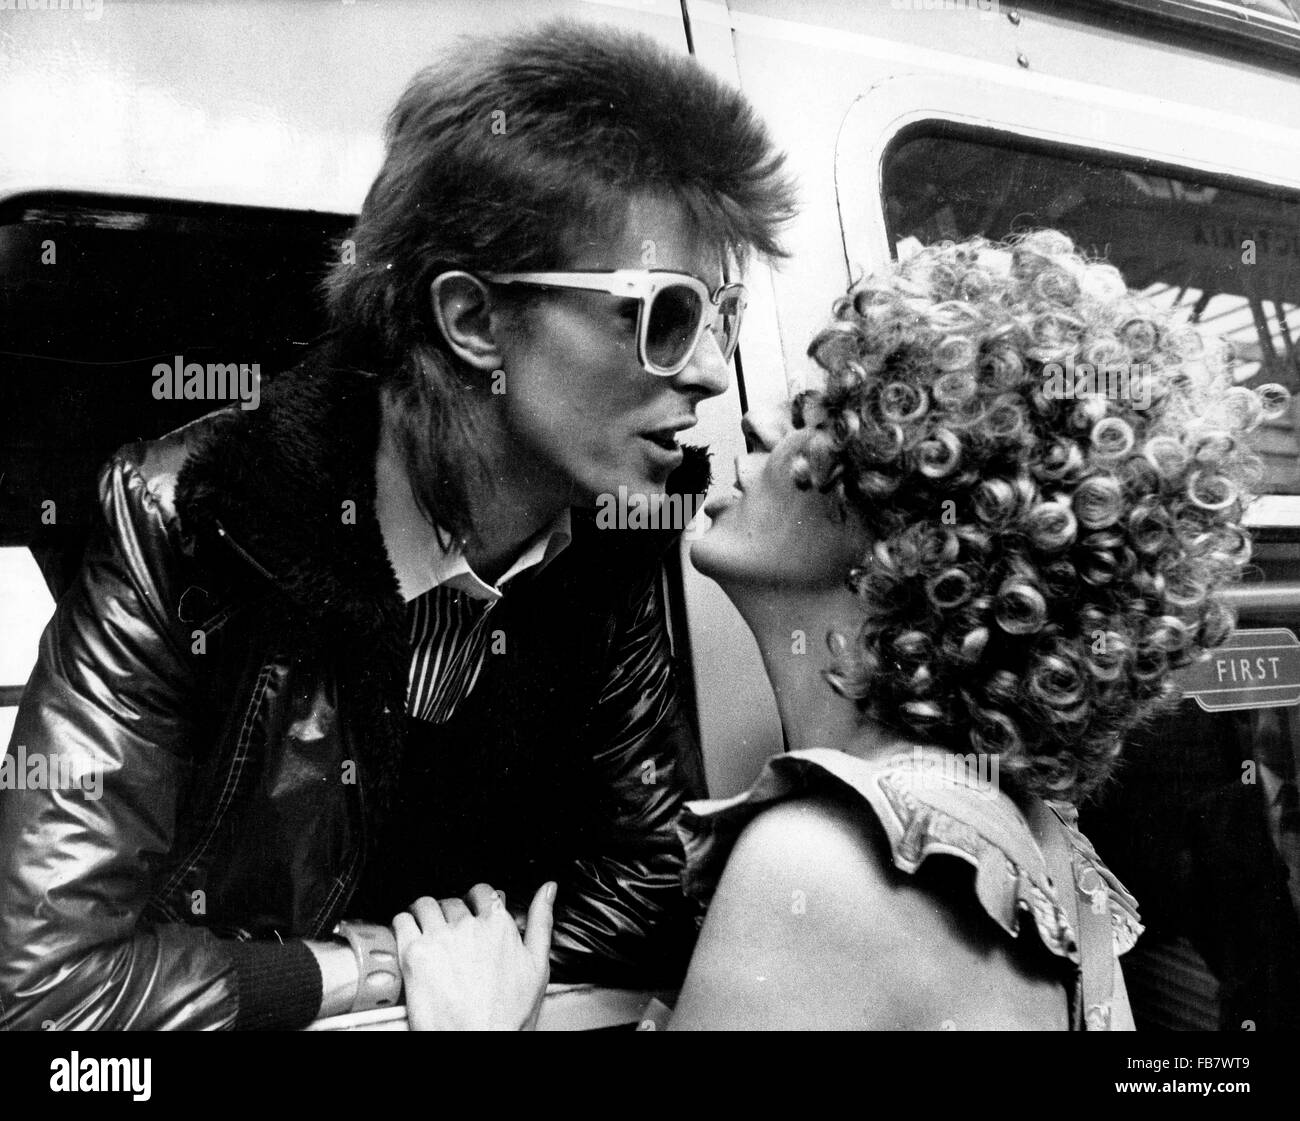 DAVID BOWIE, the infinitely changeable, fiercely forward-looking songwriter who taught generations of musicians about the power of drama, images and personae, died Sunday surrounded by family. He was 69. Bowie died after an 18-month battle with cancer. Pictured: Feb 9, 1972 - London, England, United Kingdom - Pop Star DAVID BOWIE kisses his wife ANGELA BOWIE from inside his train at Victoria Station. He is off to Paris to start recording his latest LP. © � KEYSTONE Pictures USA/ZUMAPRESS.com/Alamy Live News Stock Photo